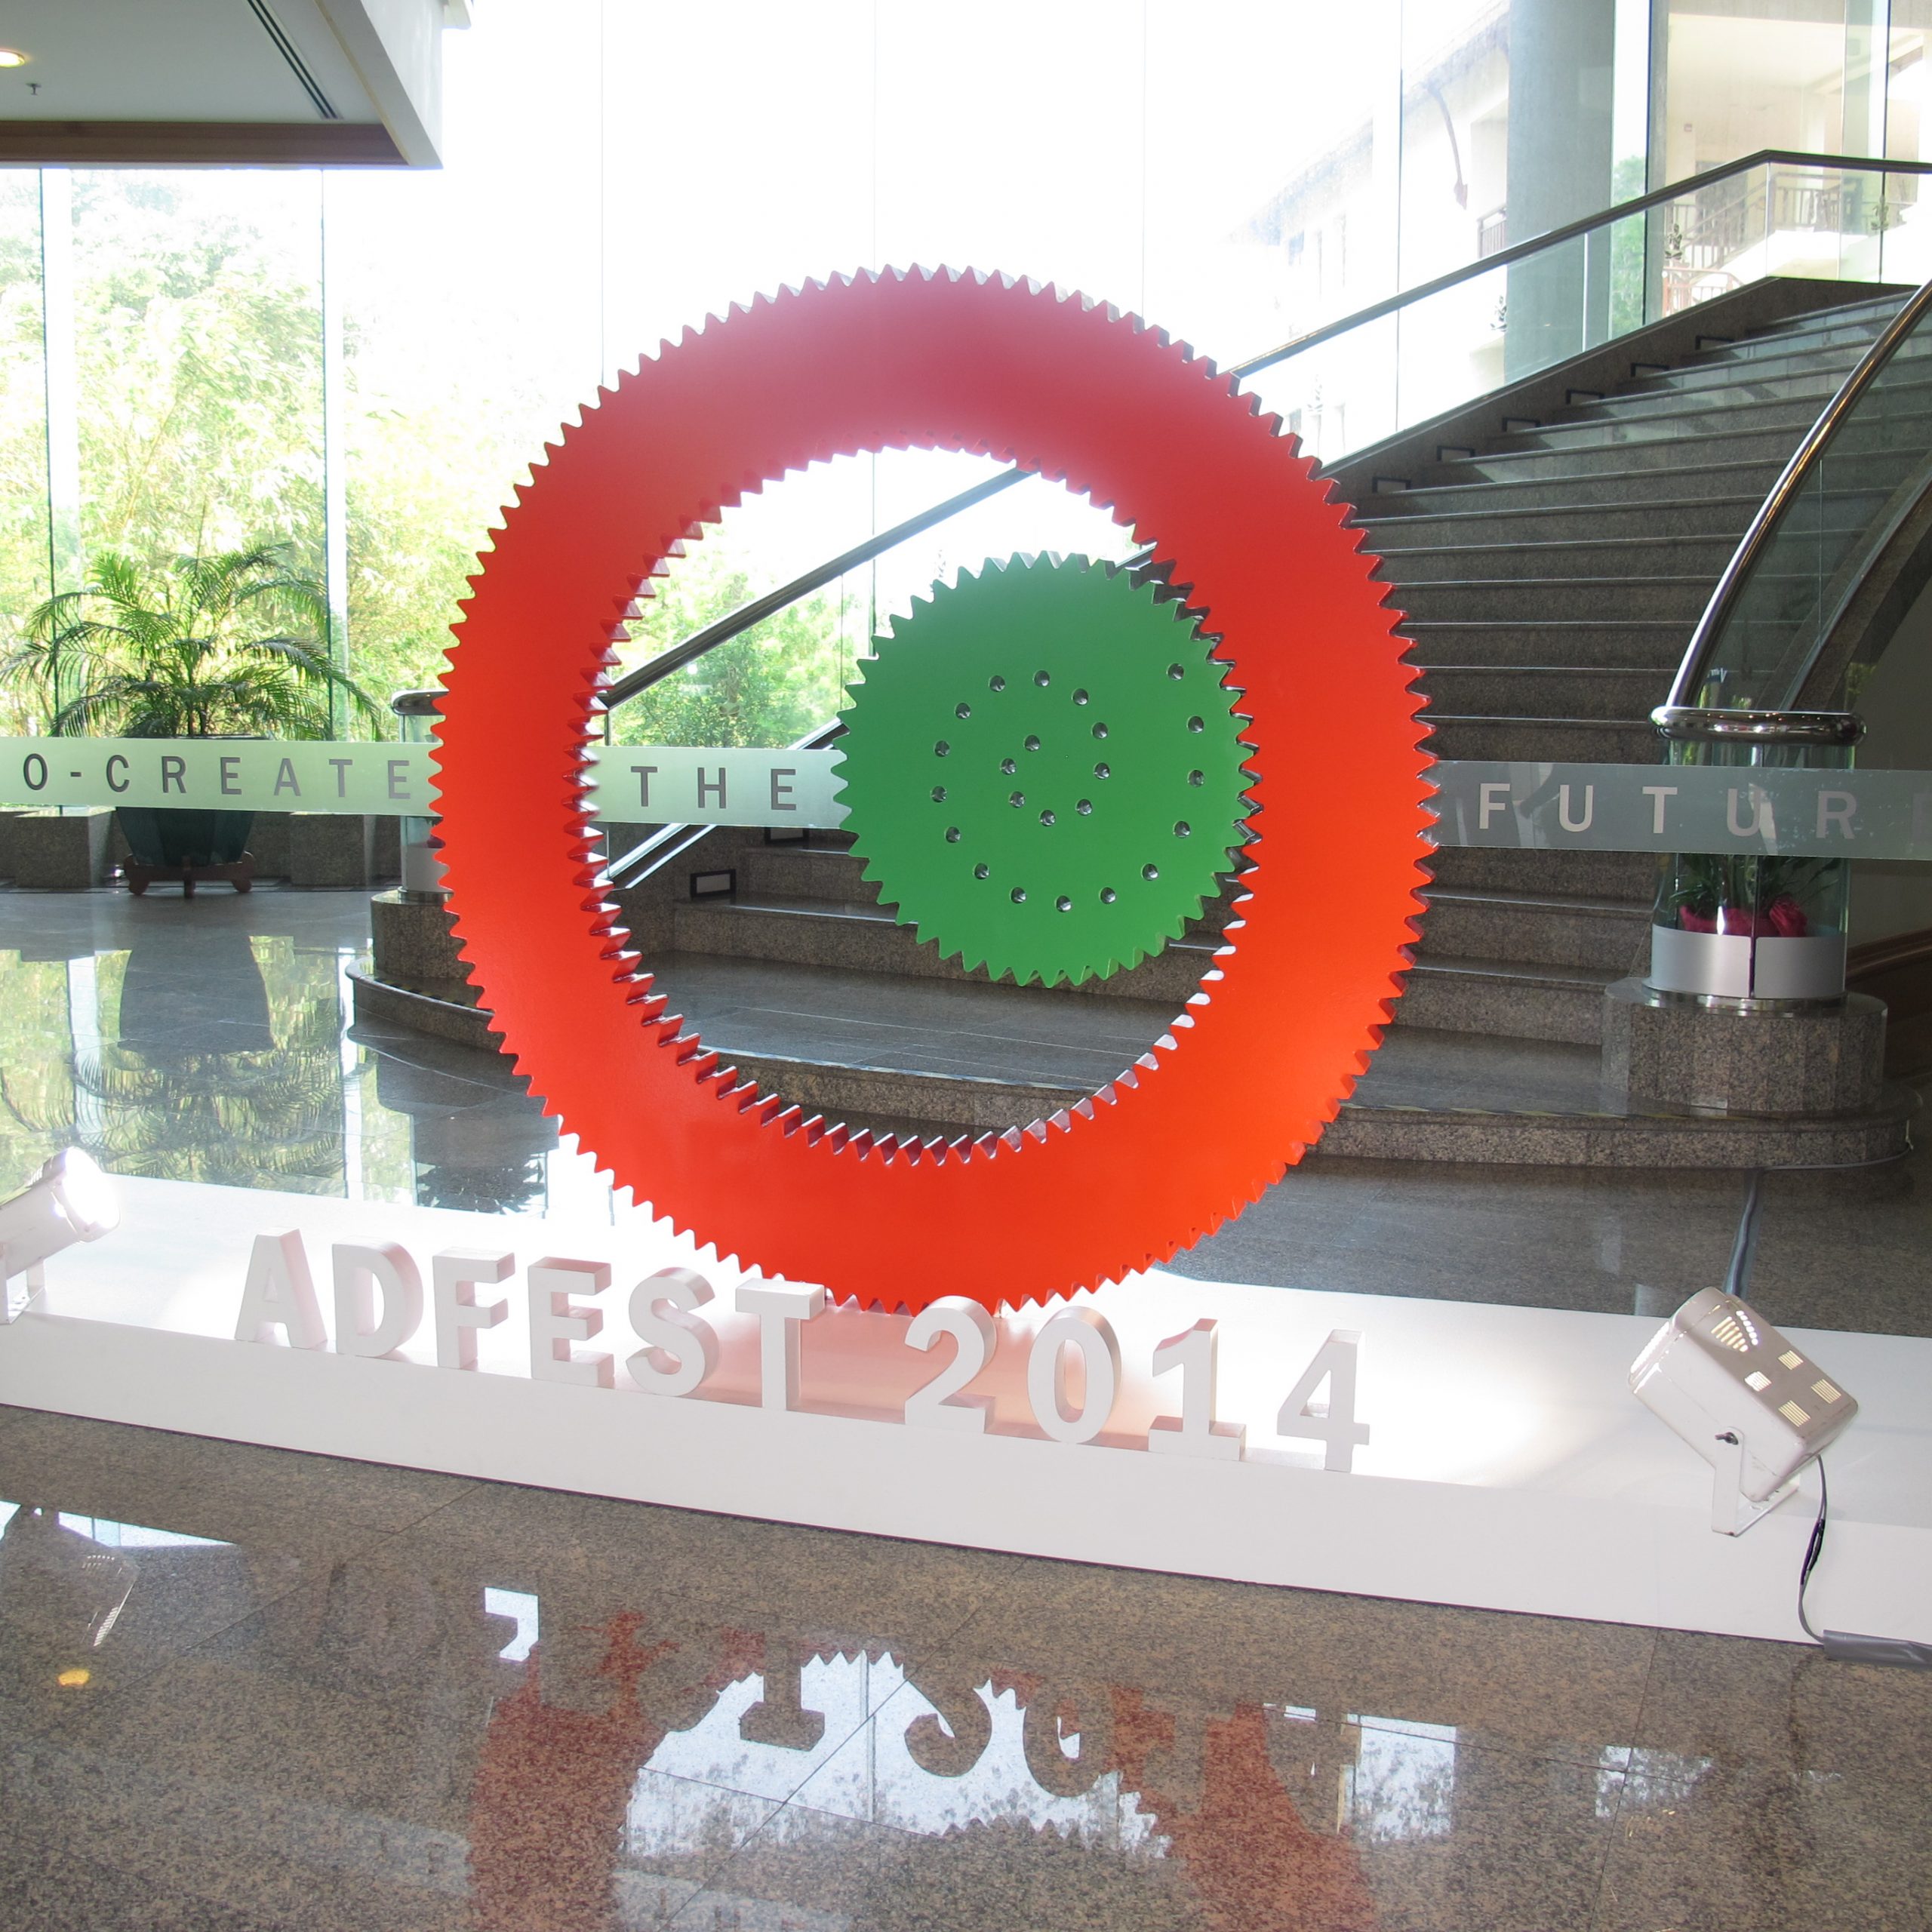 A sculpture dares delegates to Co-create the Future at AdFest 2014.JPG